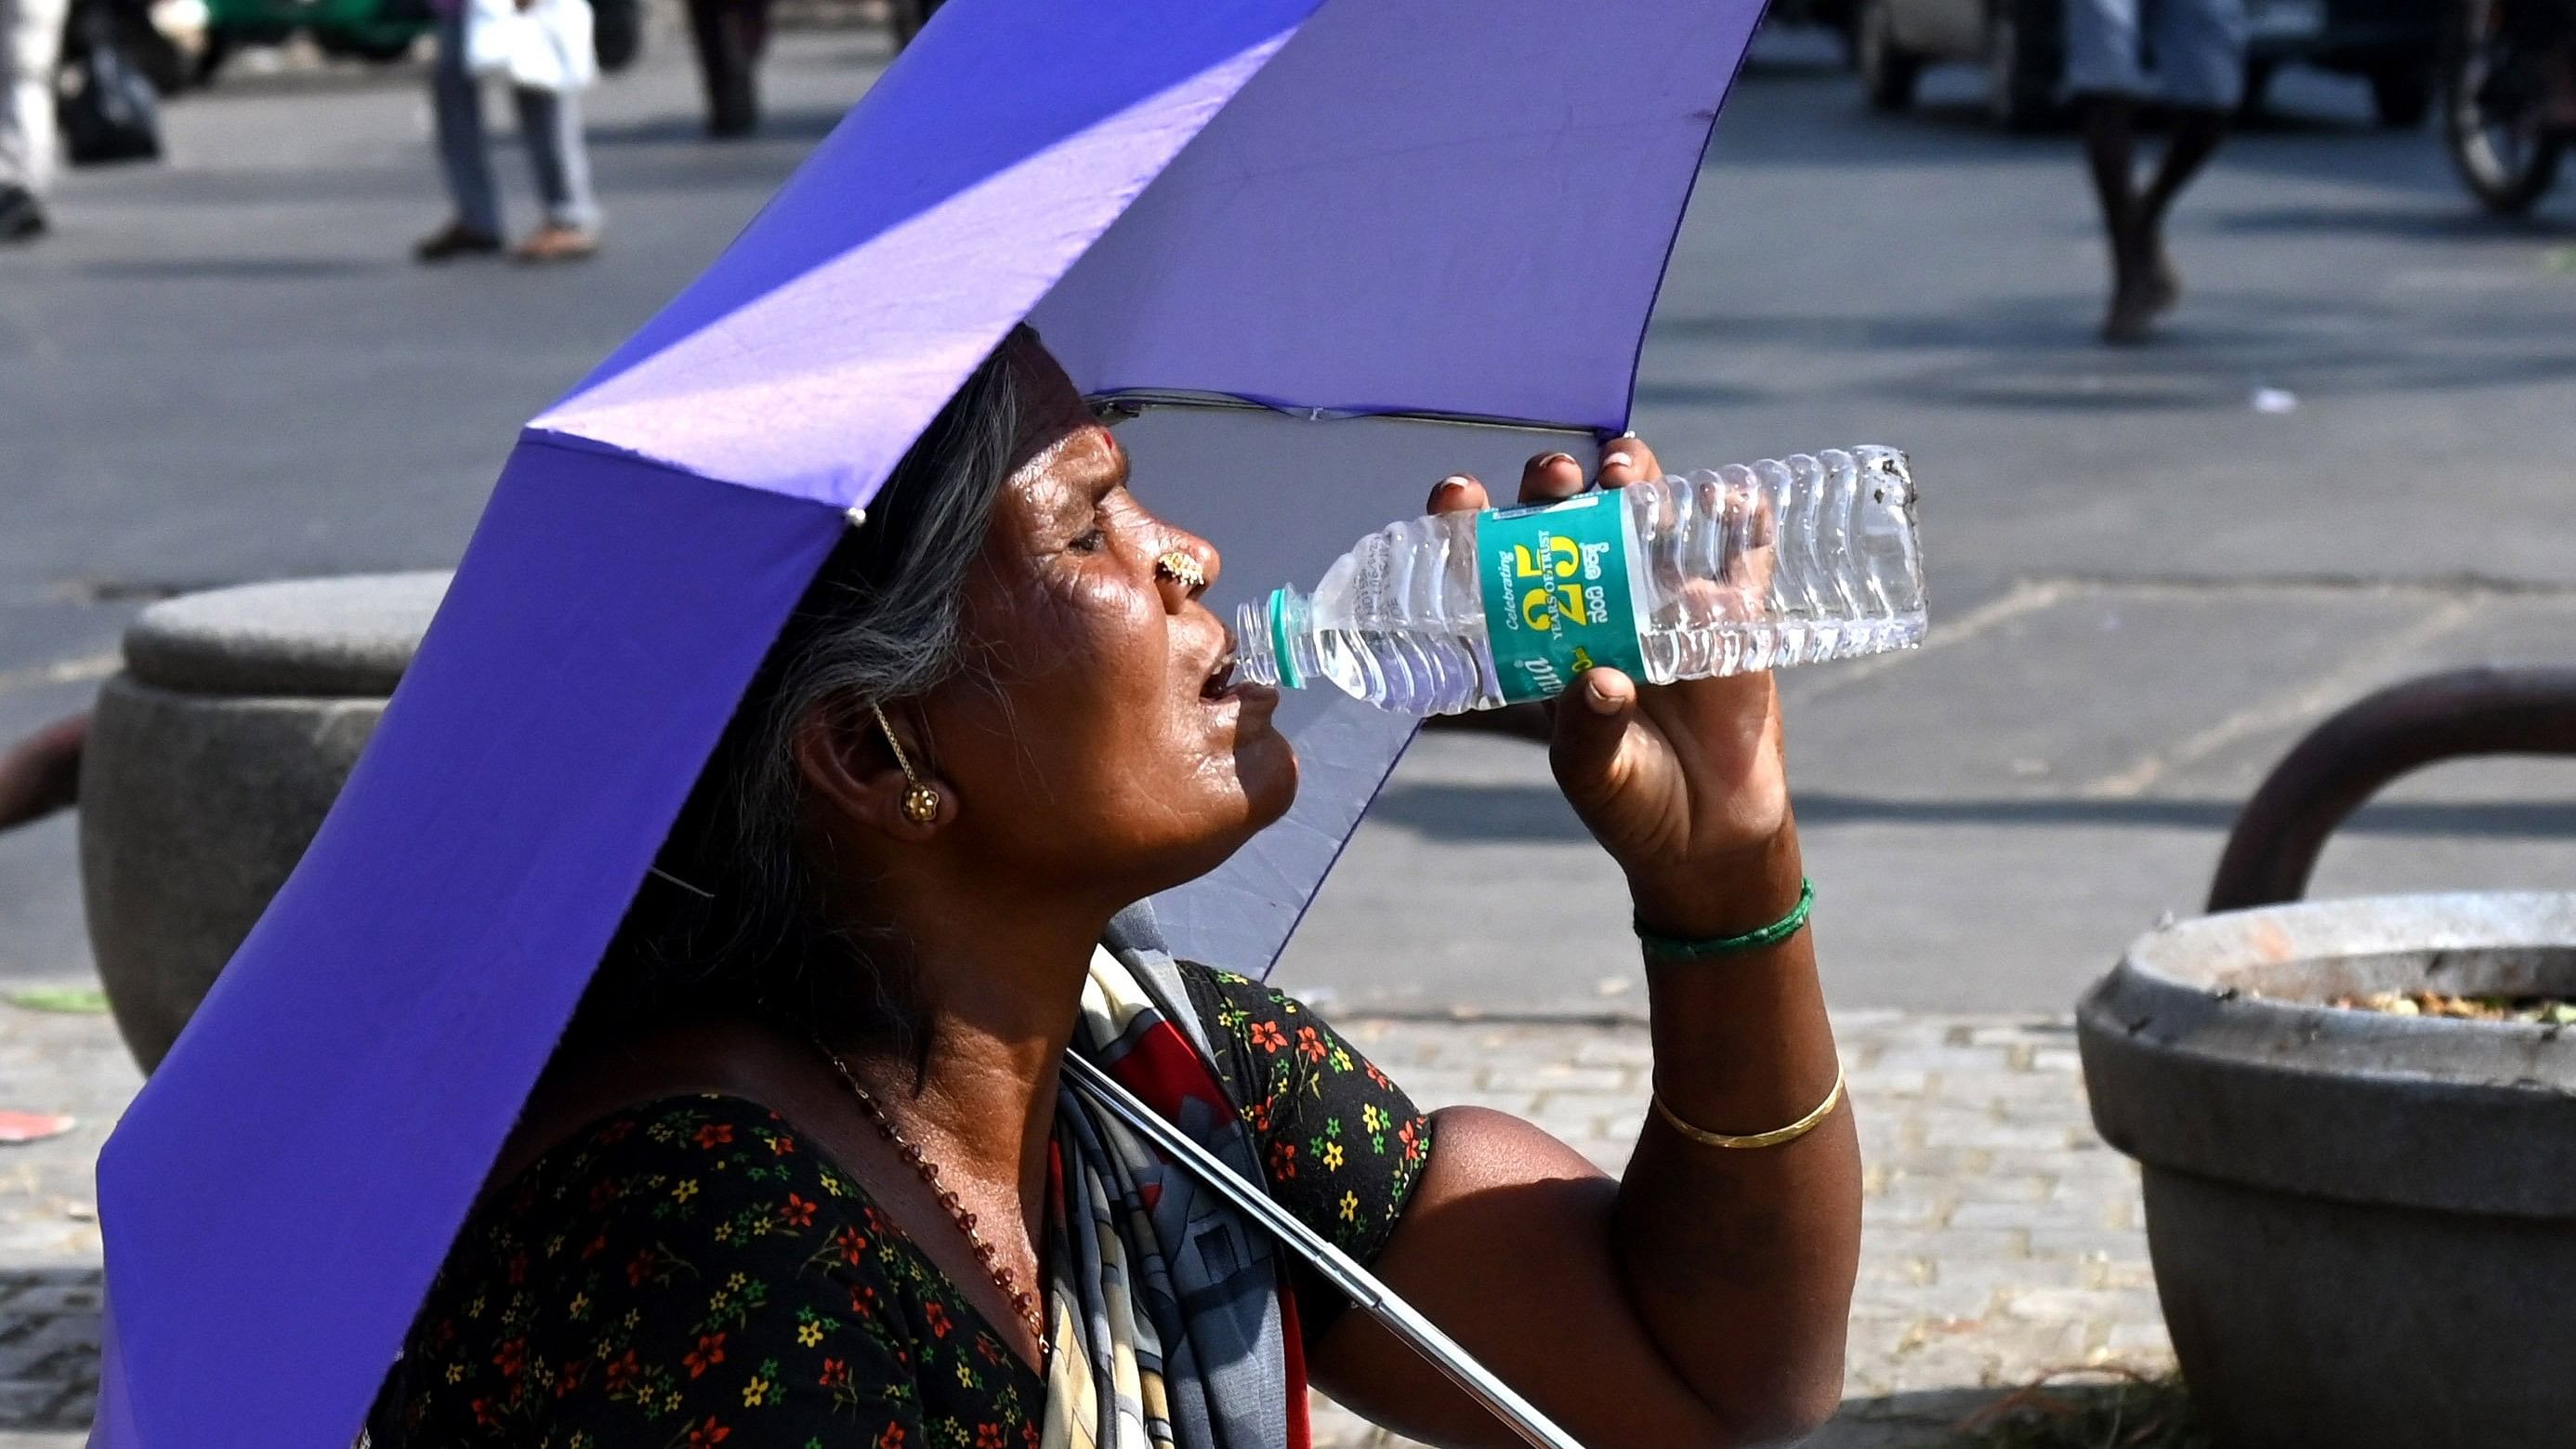 <div class="paragraphs"><p>In the blistering heat, a street vendor finds respite under her trusty umbrella, sipping from a bottle of water to ease her parched throat. </p></div>